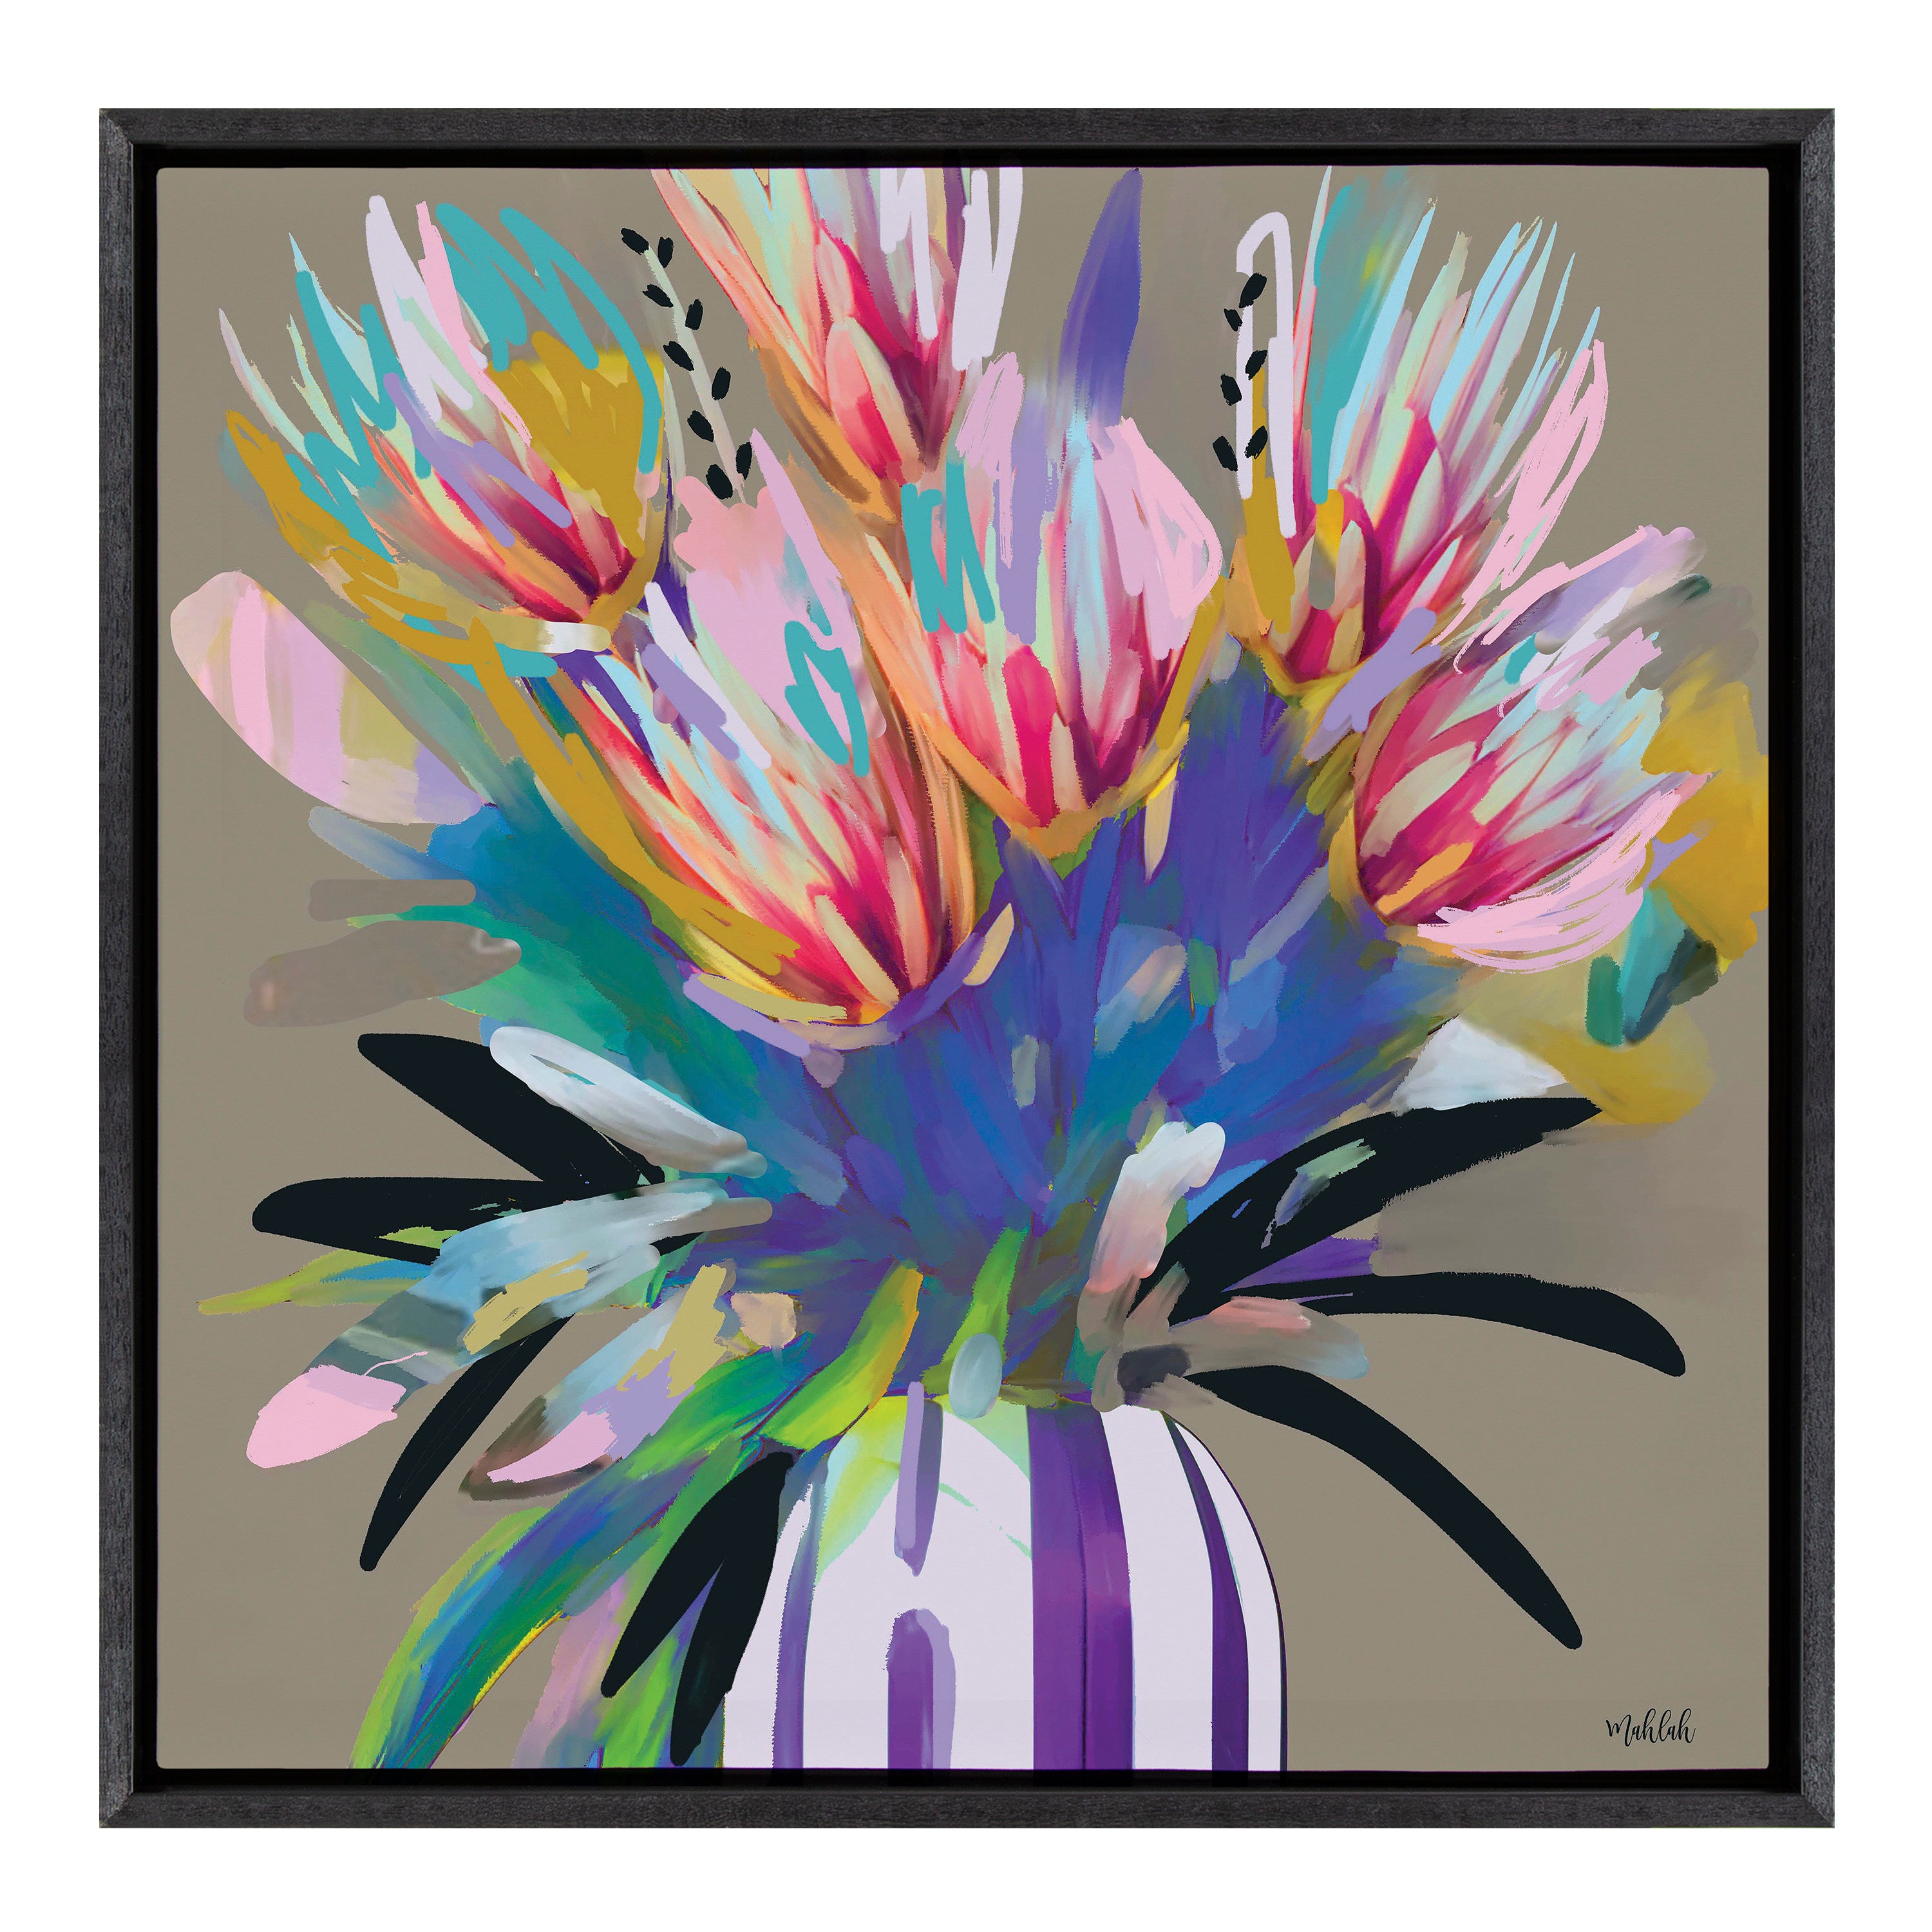 Sylvie Bright Flowers Framed Canvas by Inkheart Designs